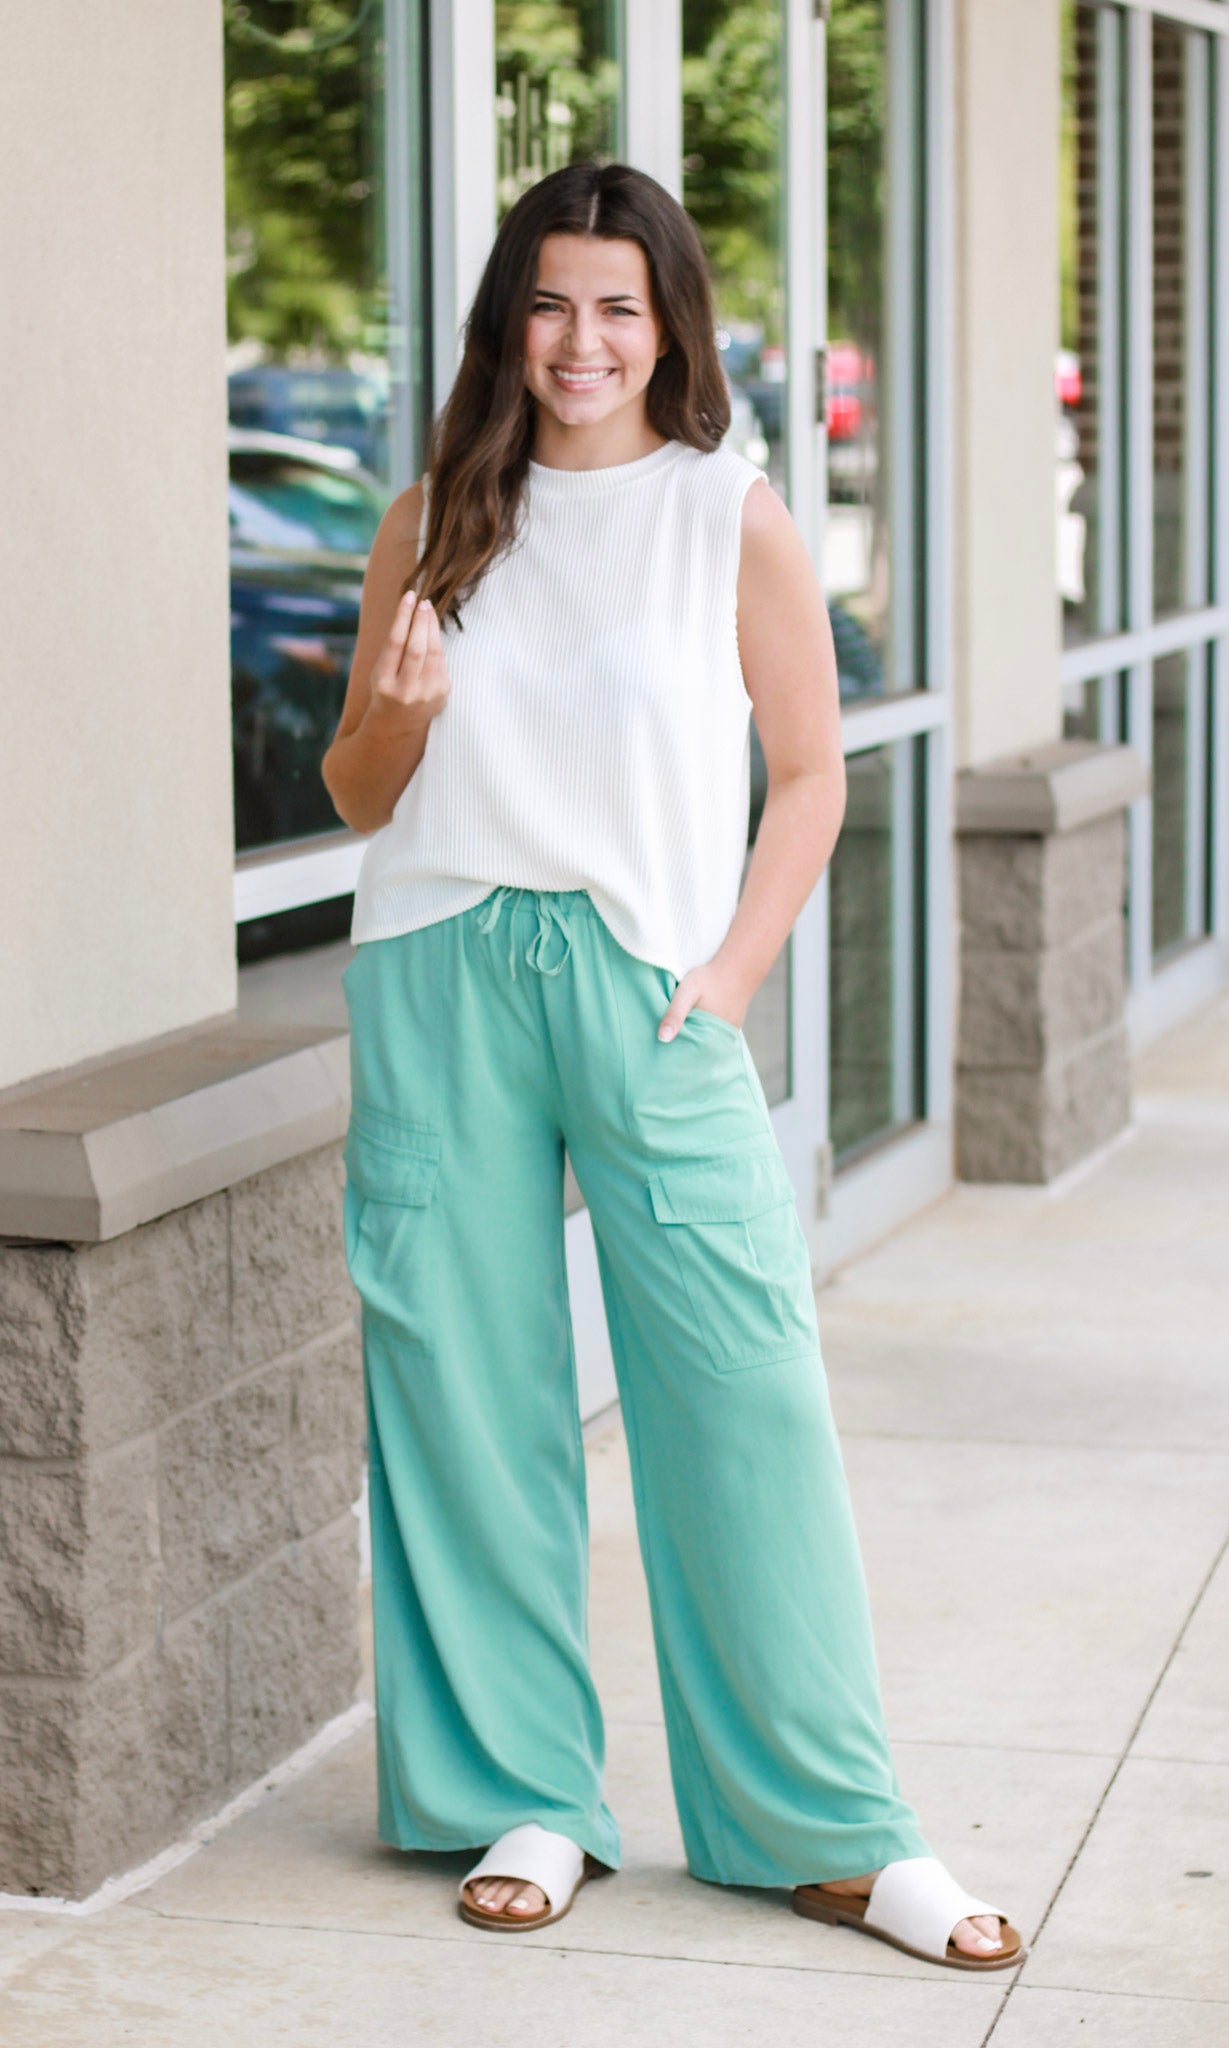 Cute in Comfort Wide Leg Pants in Teal - Allure Clothing Boutique